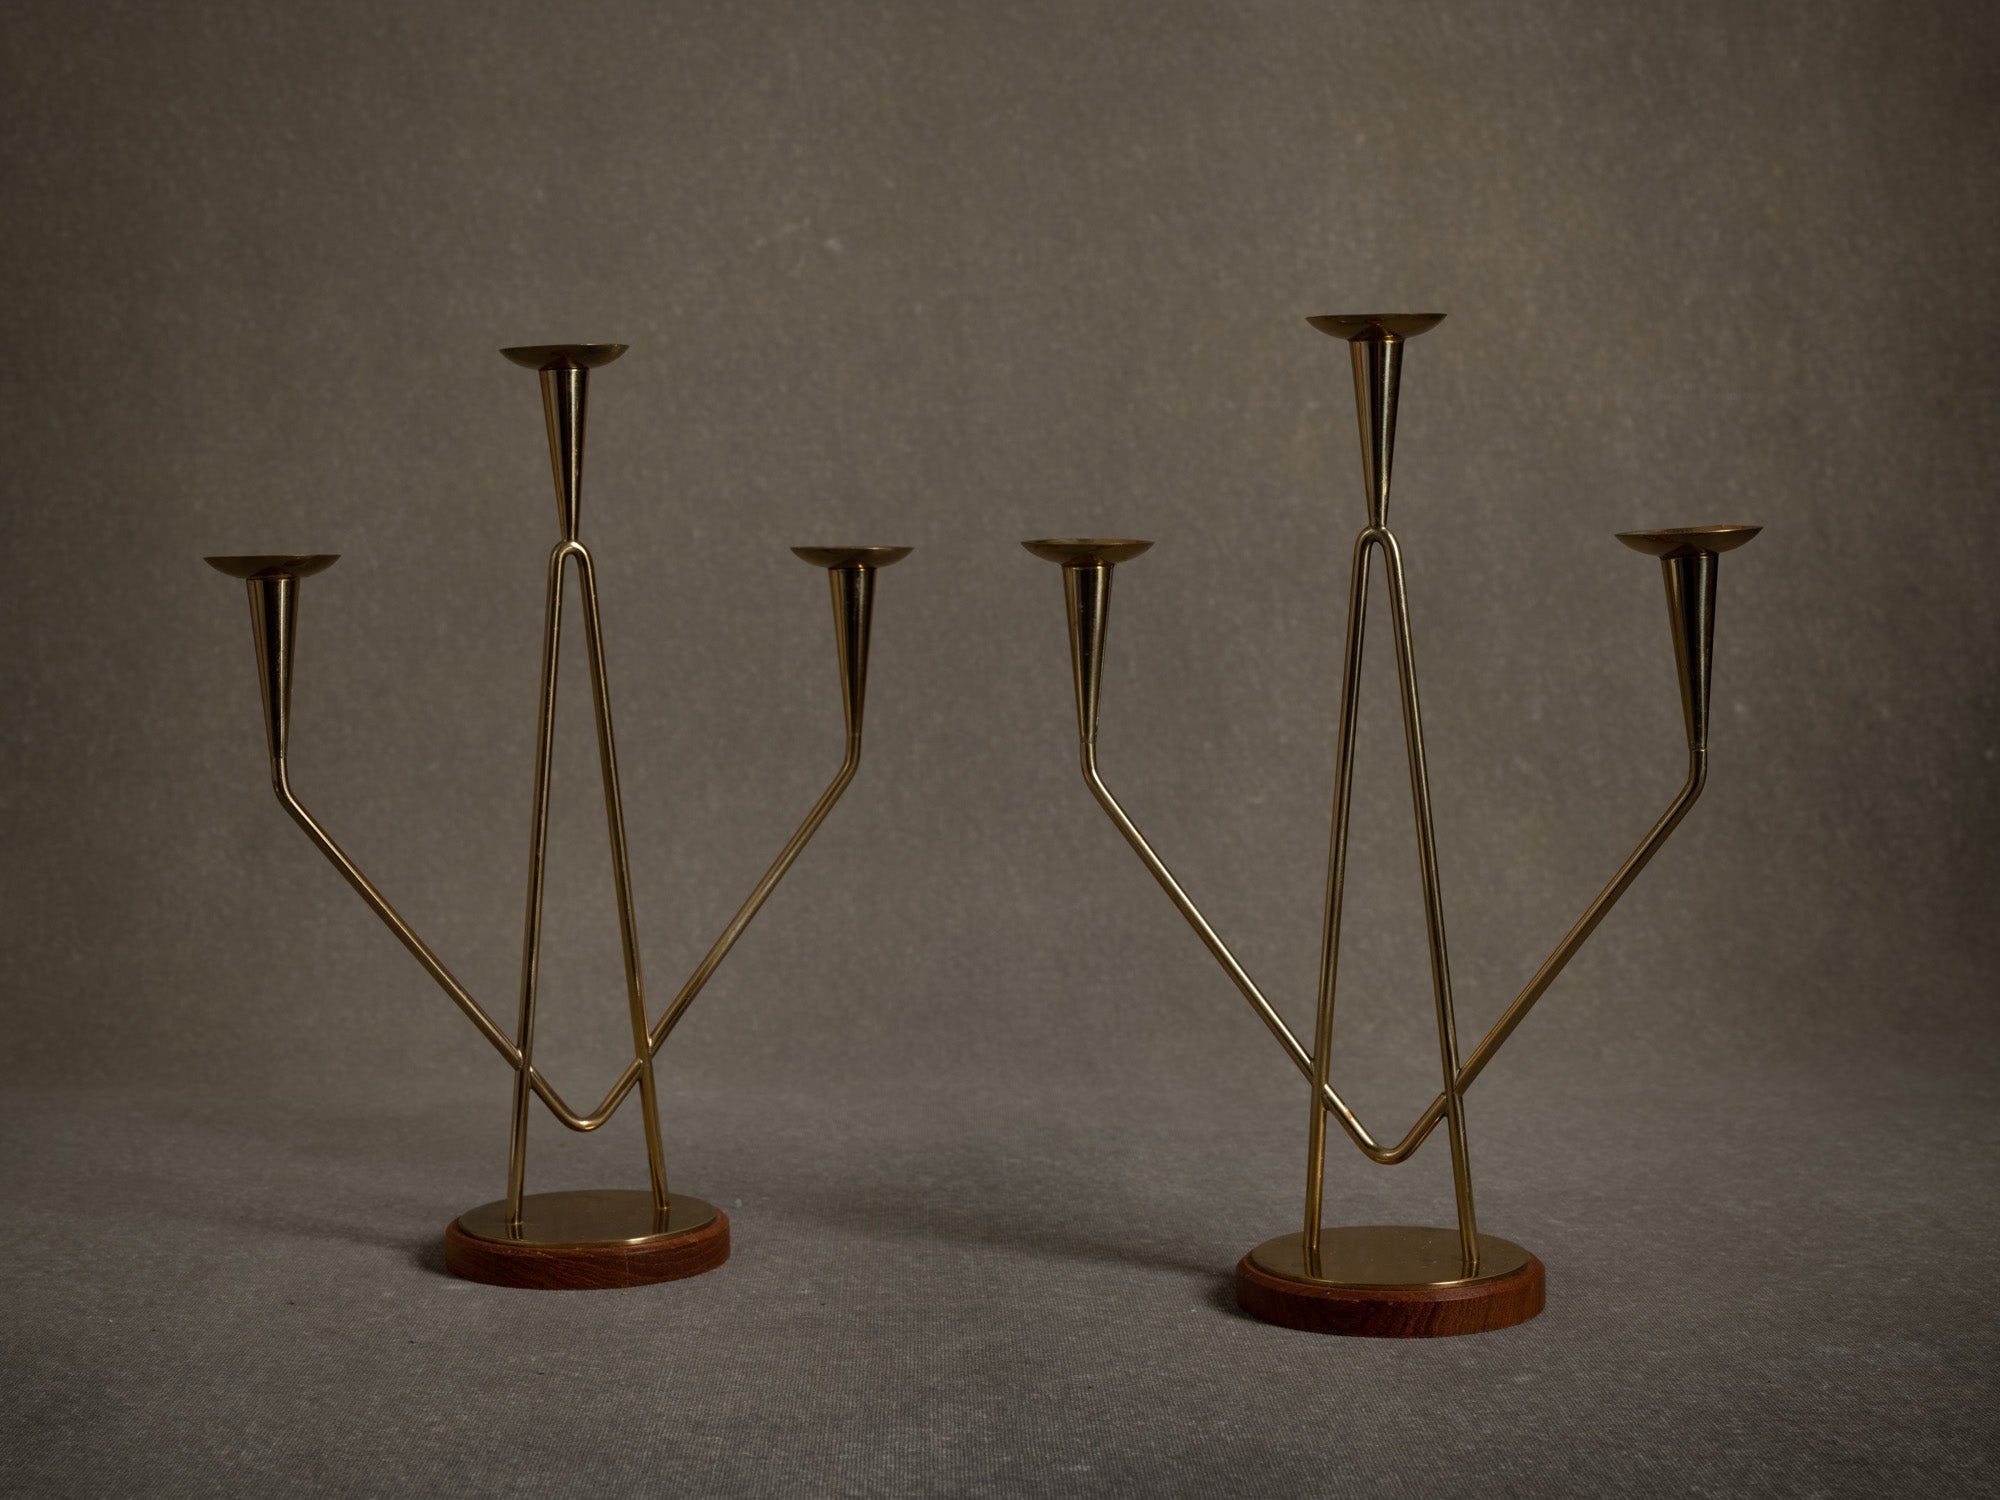 Paire de chandeliers par Gunnar Ander pour Ystad Metall, Suède (début des années 1960)..Set of 2 candle holders /candelabras by Gunnar Ander for Ystad Metall, Sweden (Early 1960's)